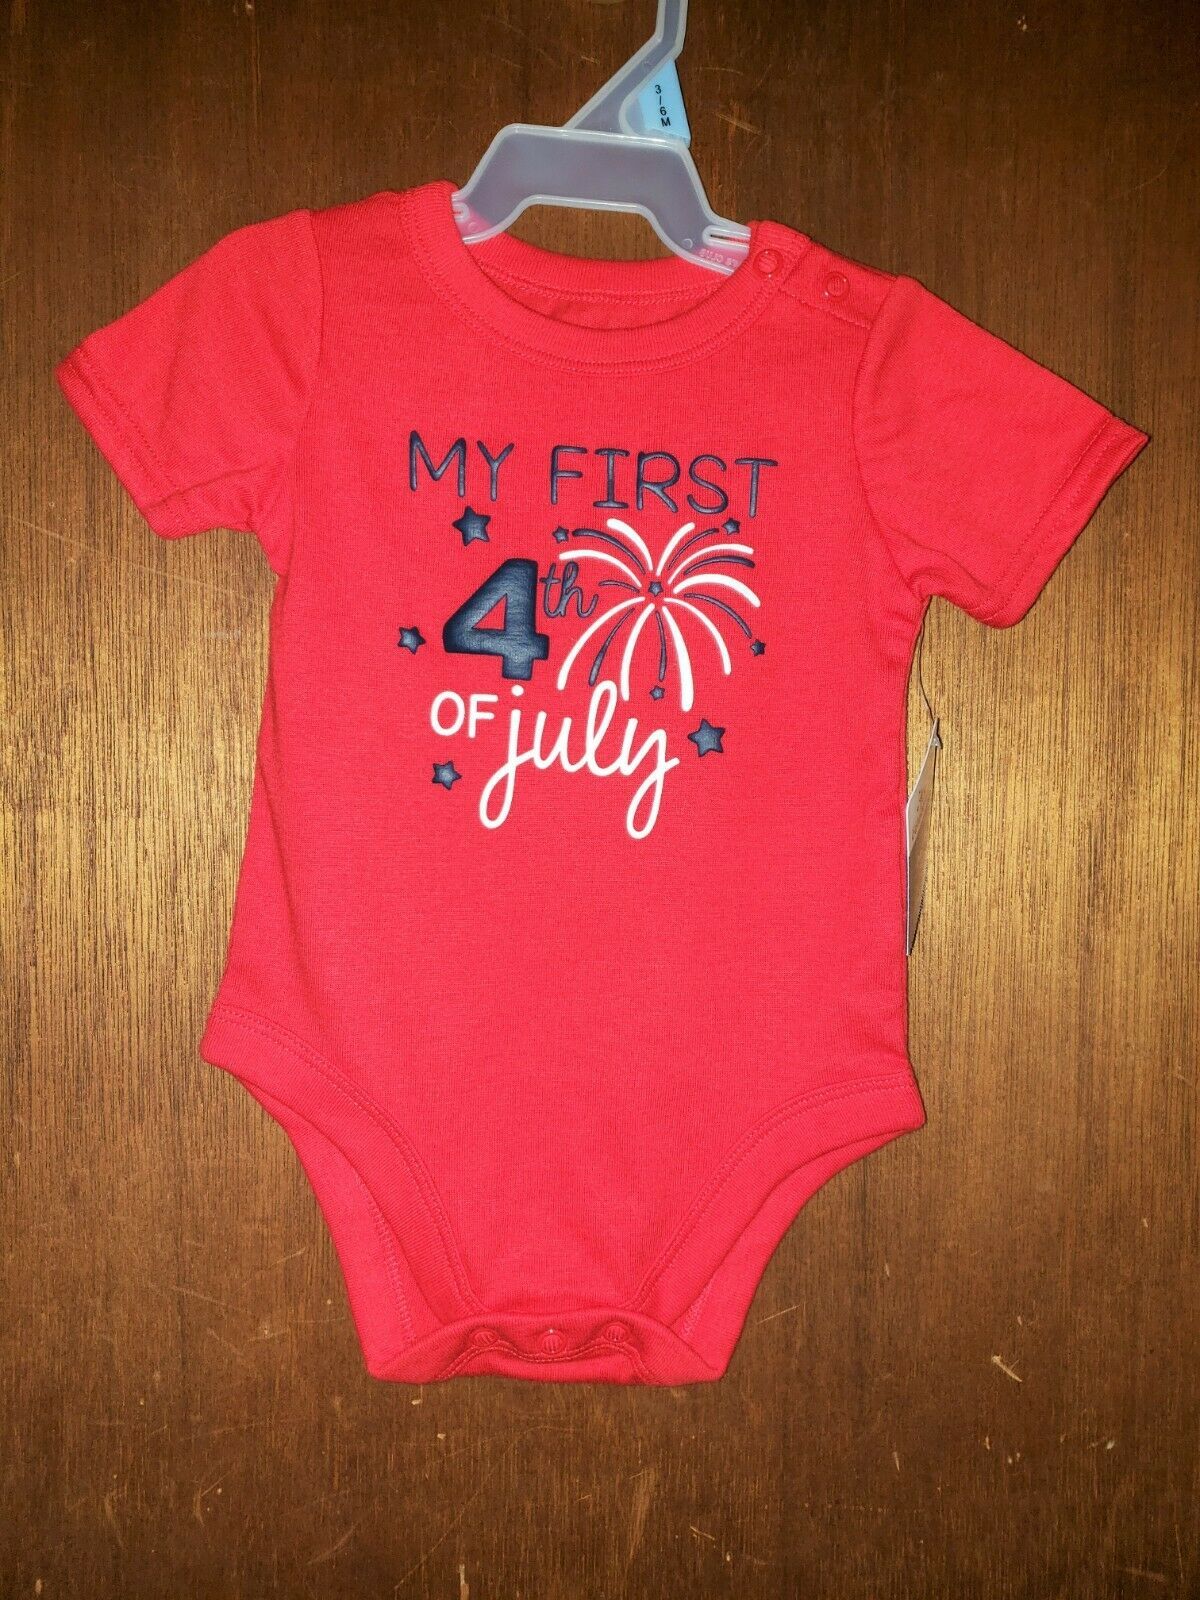 Celebrate! Patriotic Infant One-Piece Creeper - New - My First 4th of July